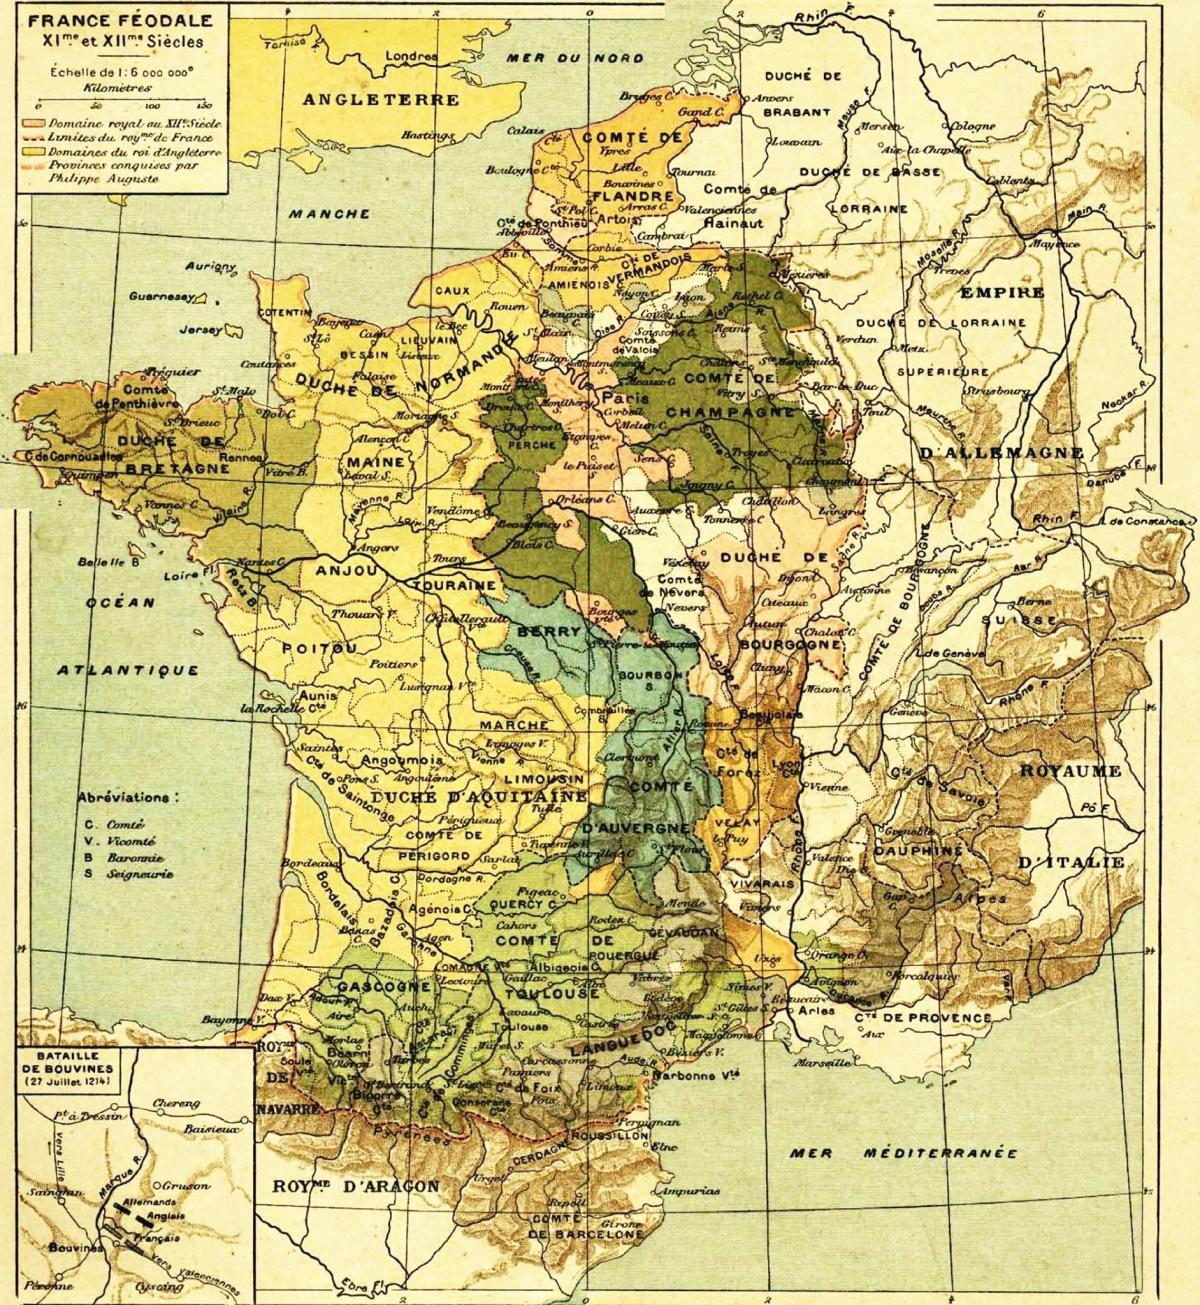 map of France medieval